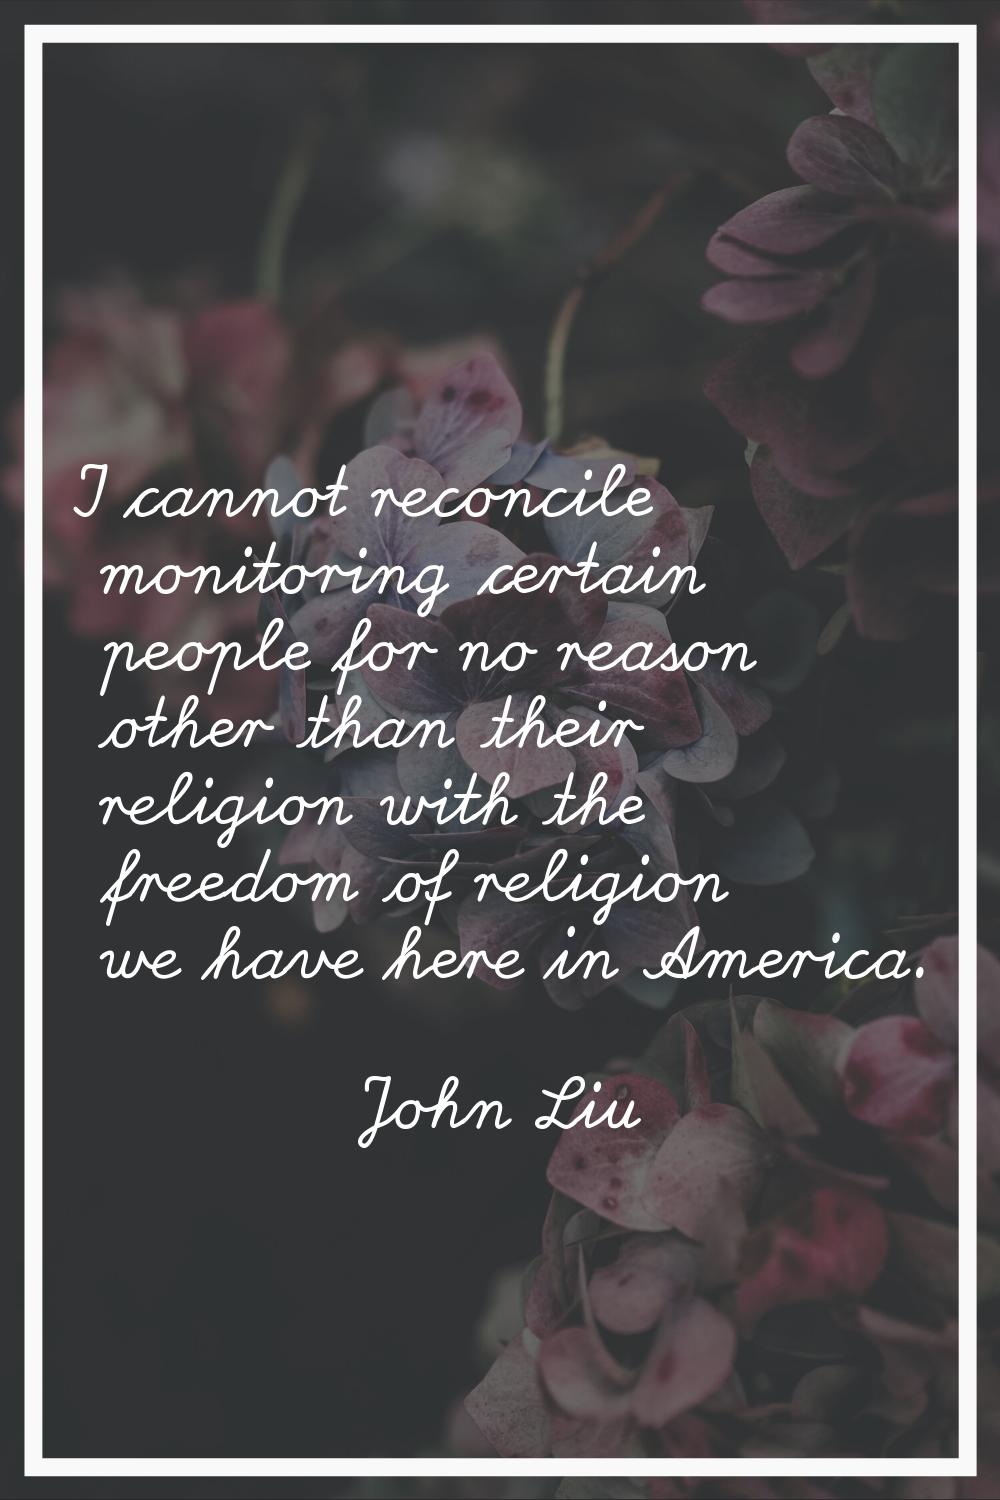 I cannot reconcile monitoring certain people for no reason other than their religion with the freed